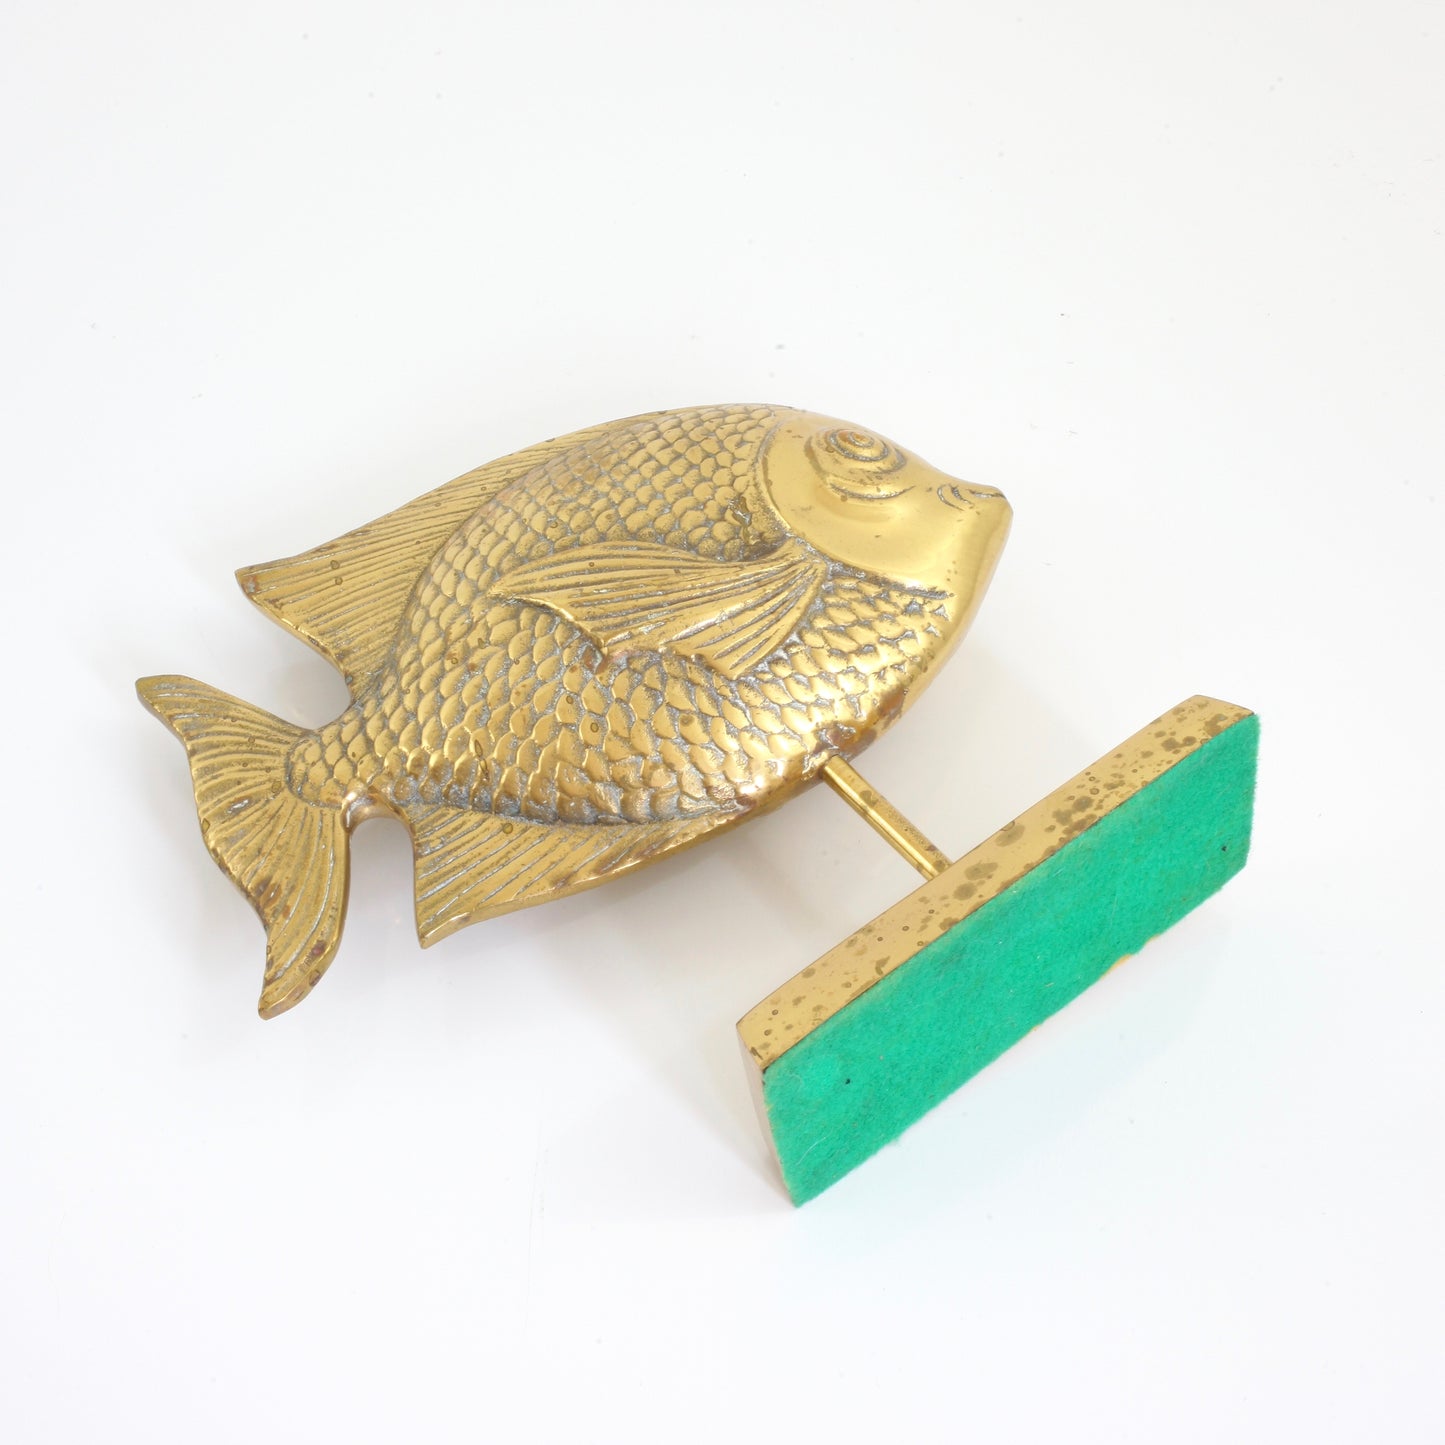 SOLD - Vintage Brass Tropical Fish on Stand